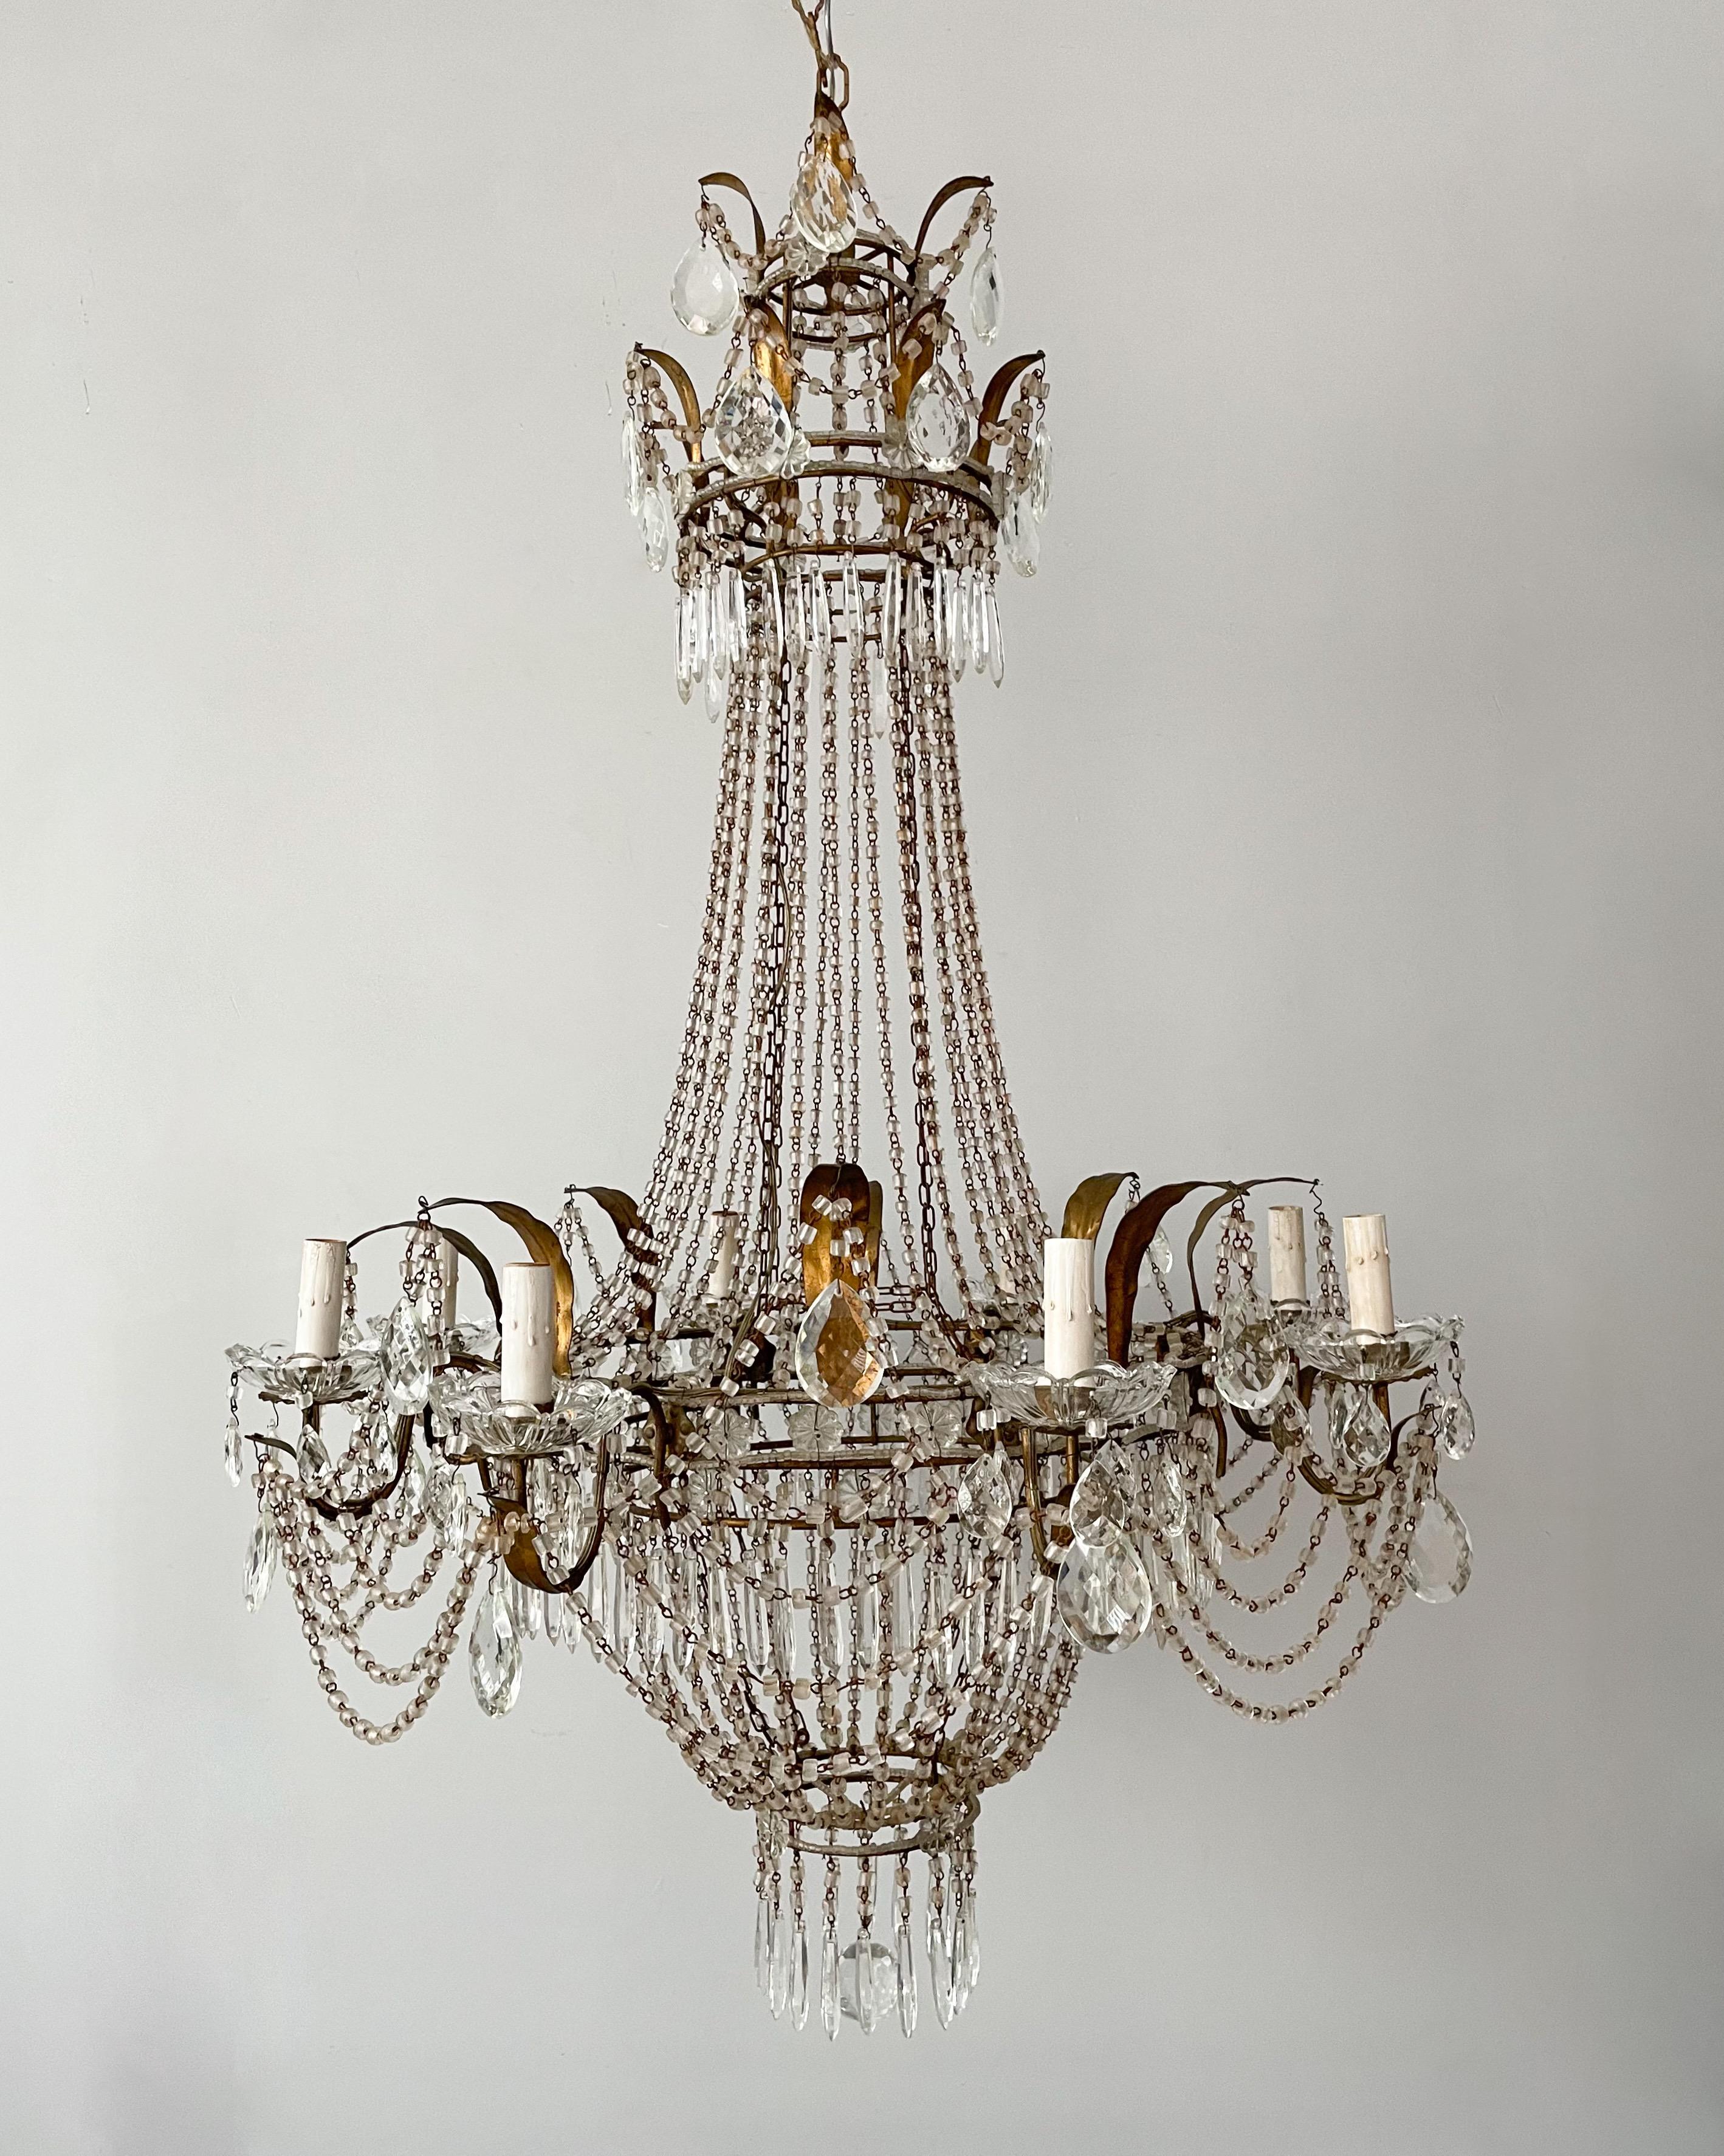 Gorgeous, 1940s Italian crystal beaded
chandelier in the Empire style.

The chandelier consists of a leafy gilt iron
frame decorated with cascading macaroni glass beads and faceted prisms. The beads have acquired a pleasing rusty patina over the